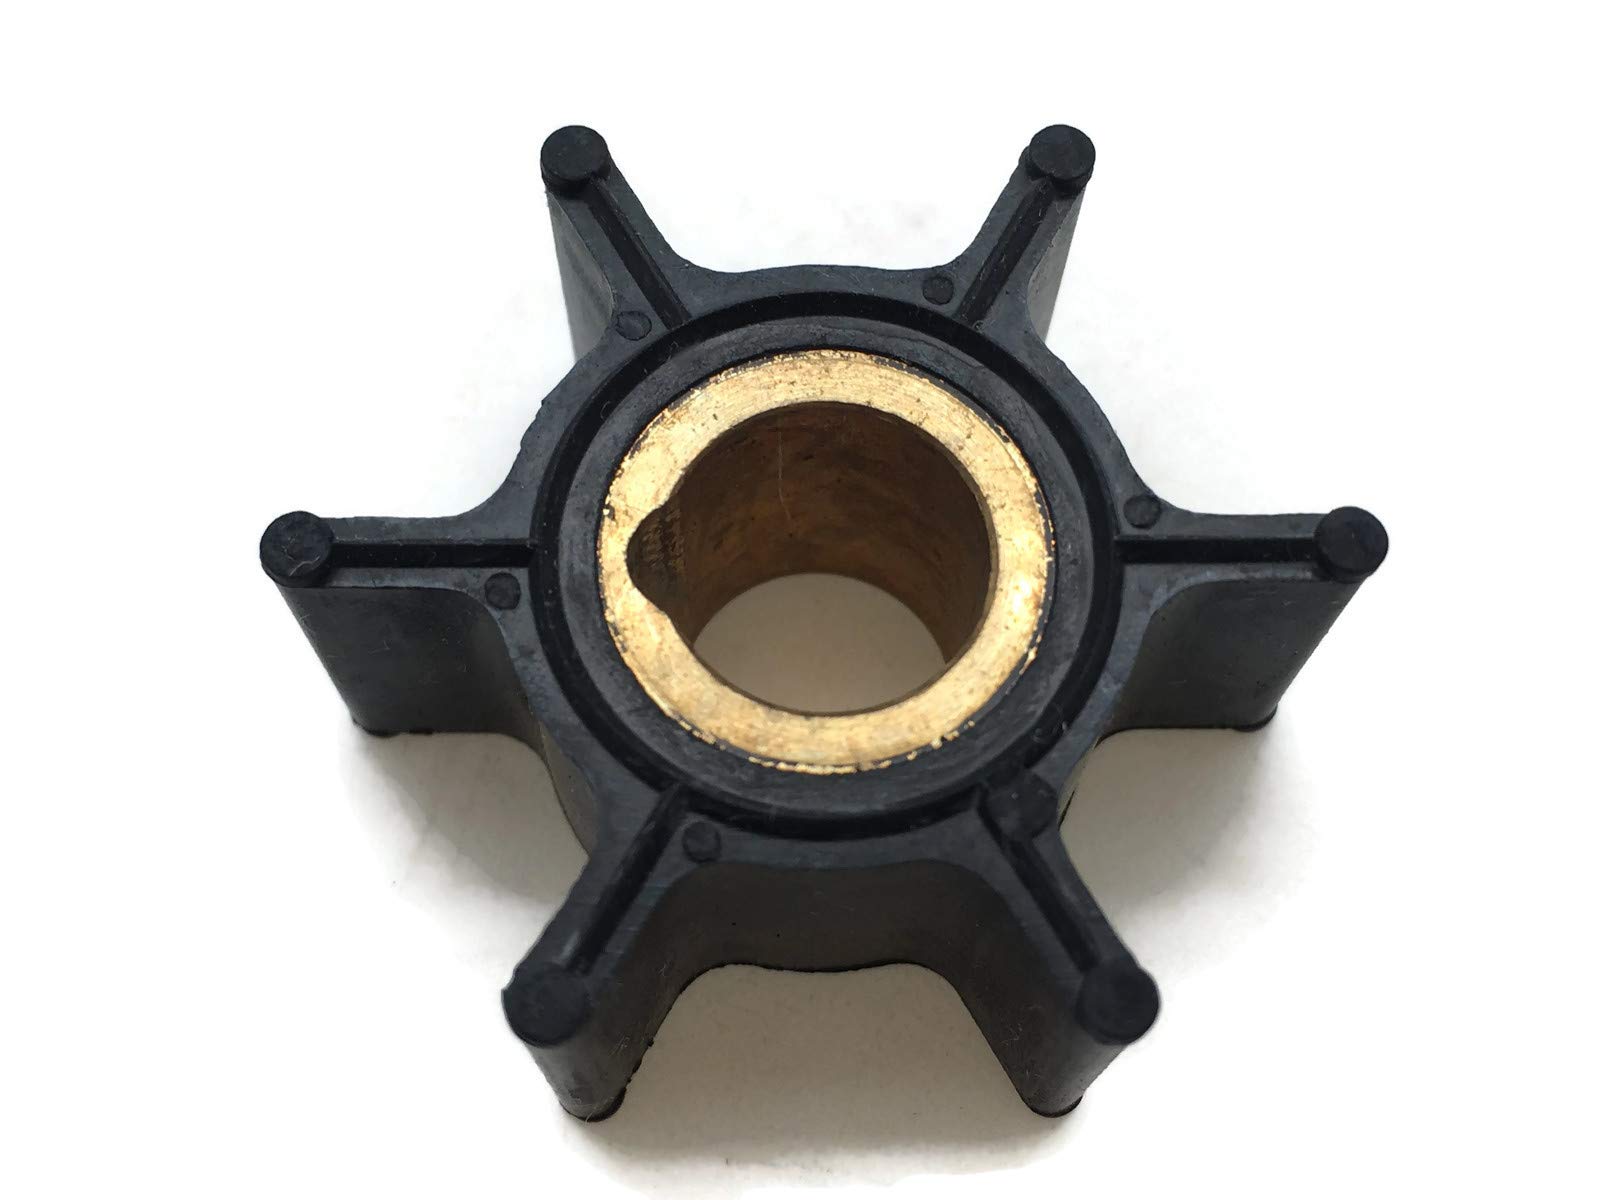 Boat Motor Water Pump Impeller 389576 0389576 18-3091 for Johnson Evinrude OMC BRP 4HP 4.5HP 5HP 6HP 8HP 2-Stroke Outboard Motor Engine von ITACO